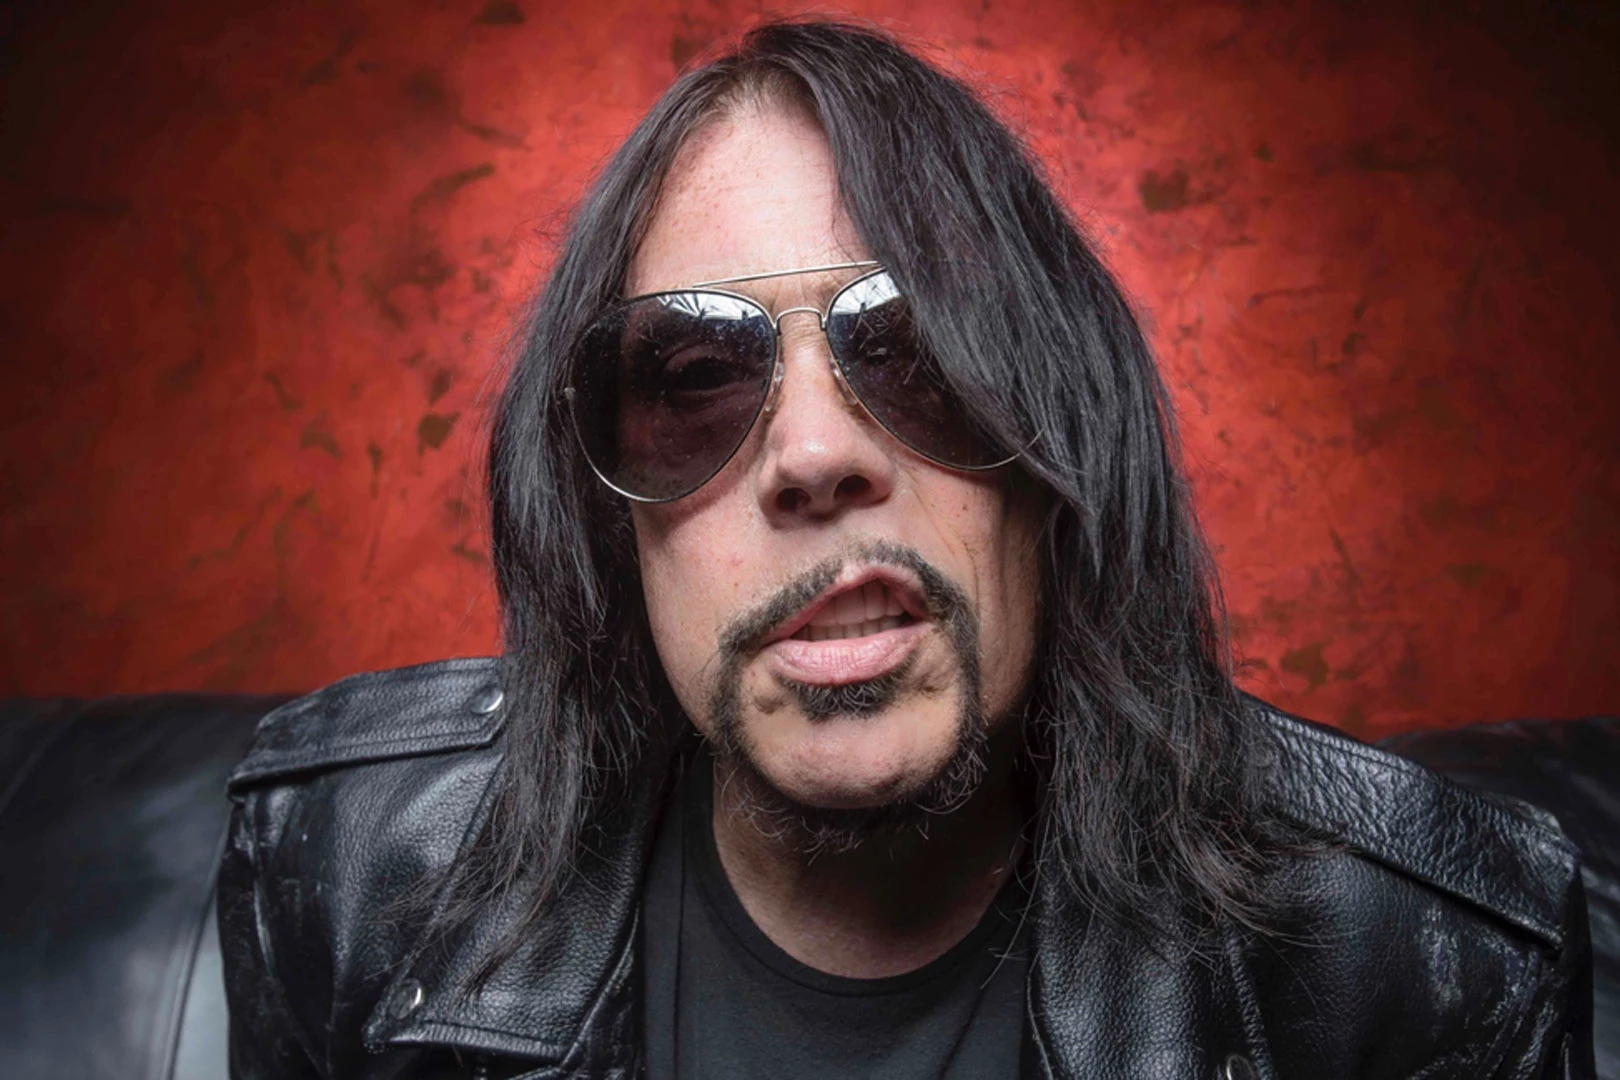 Dave Wyndorf Thinks Bands Who Change Too Much Should Change Name